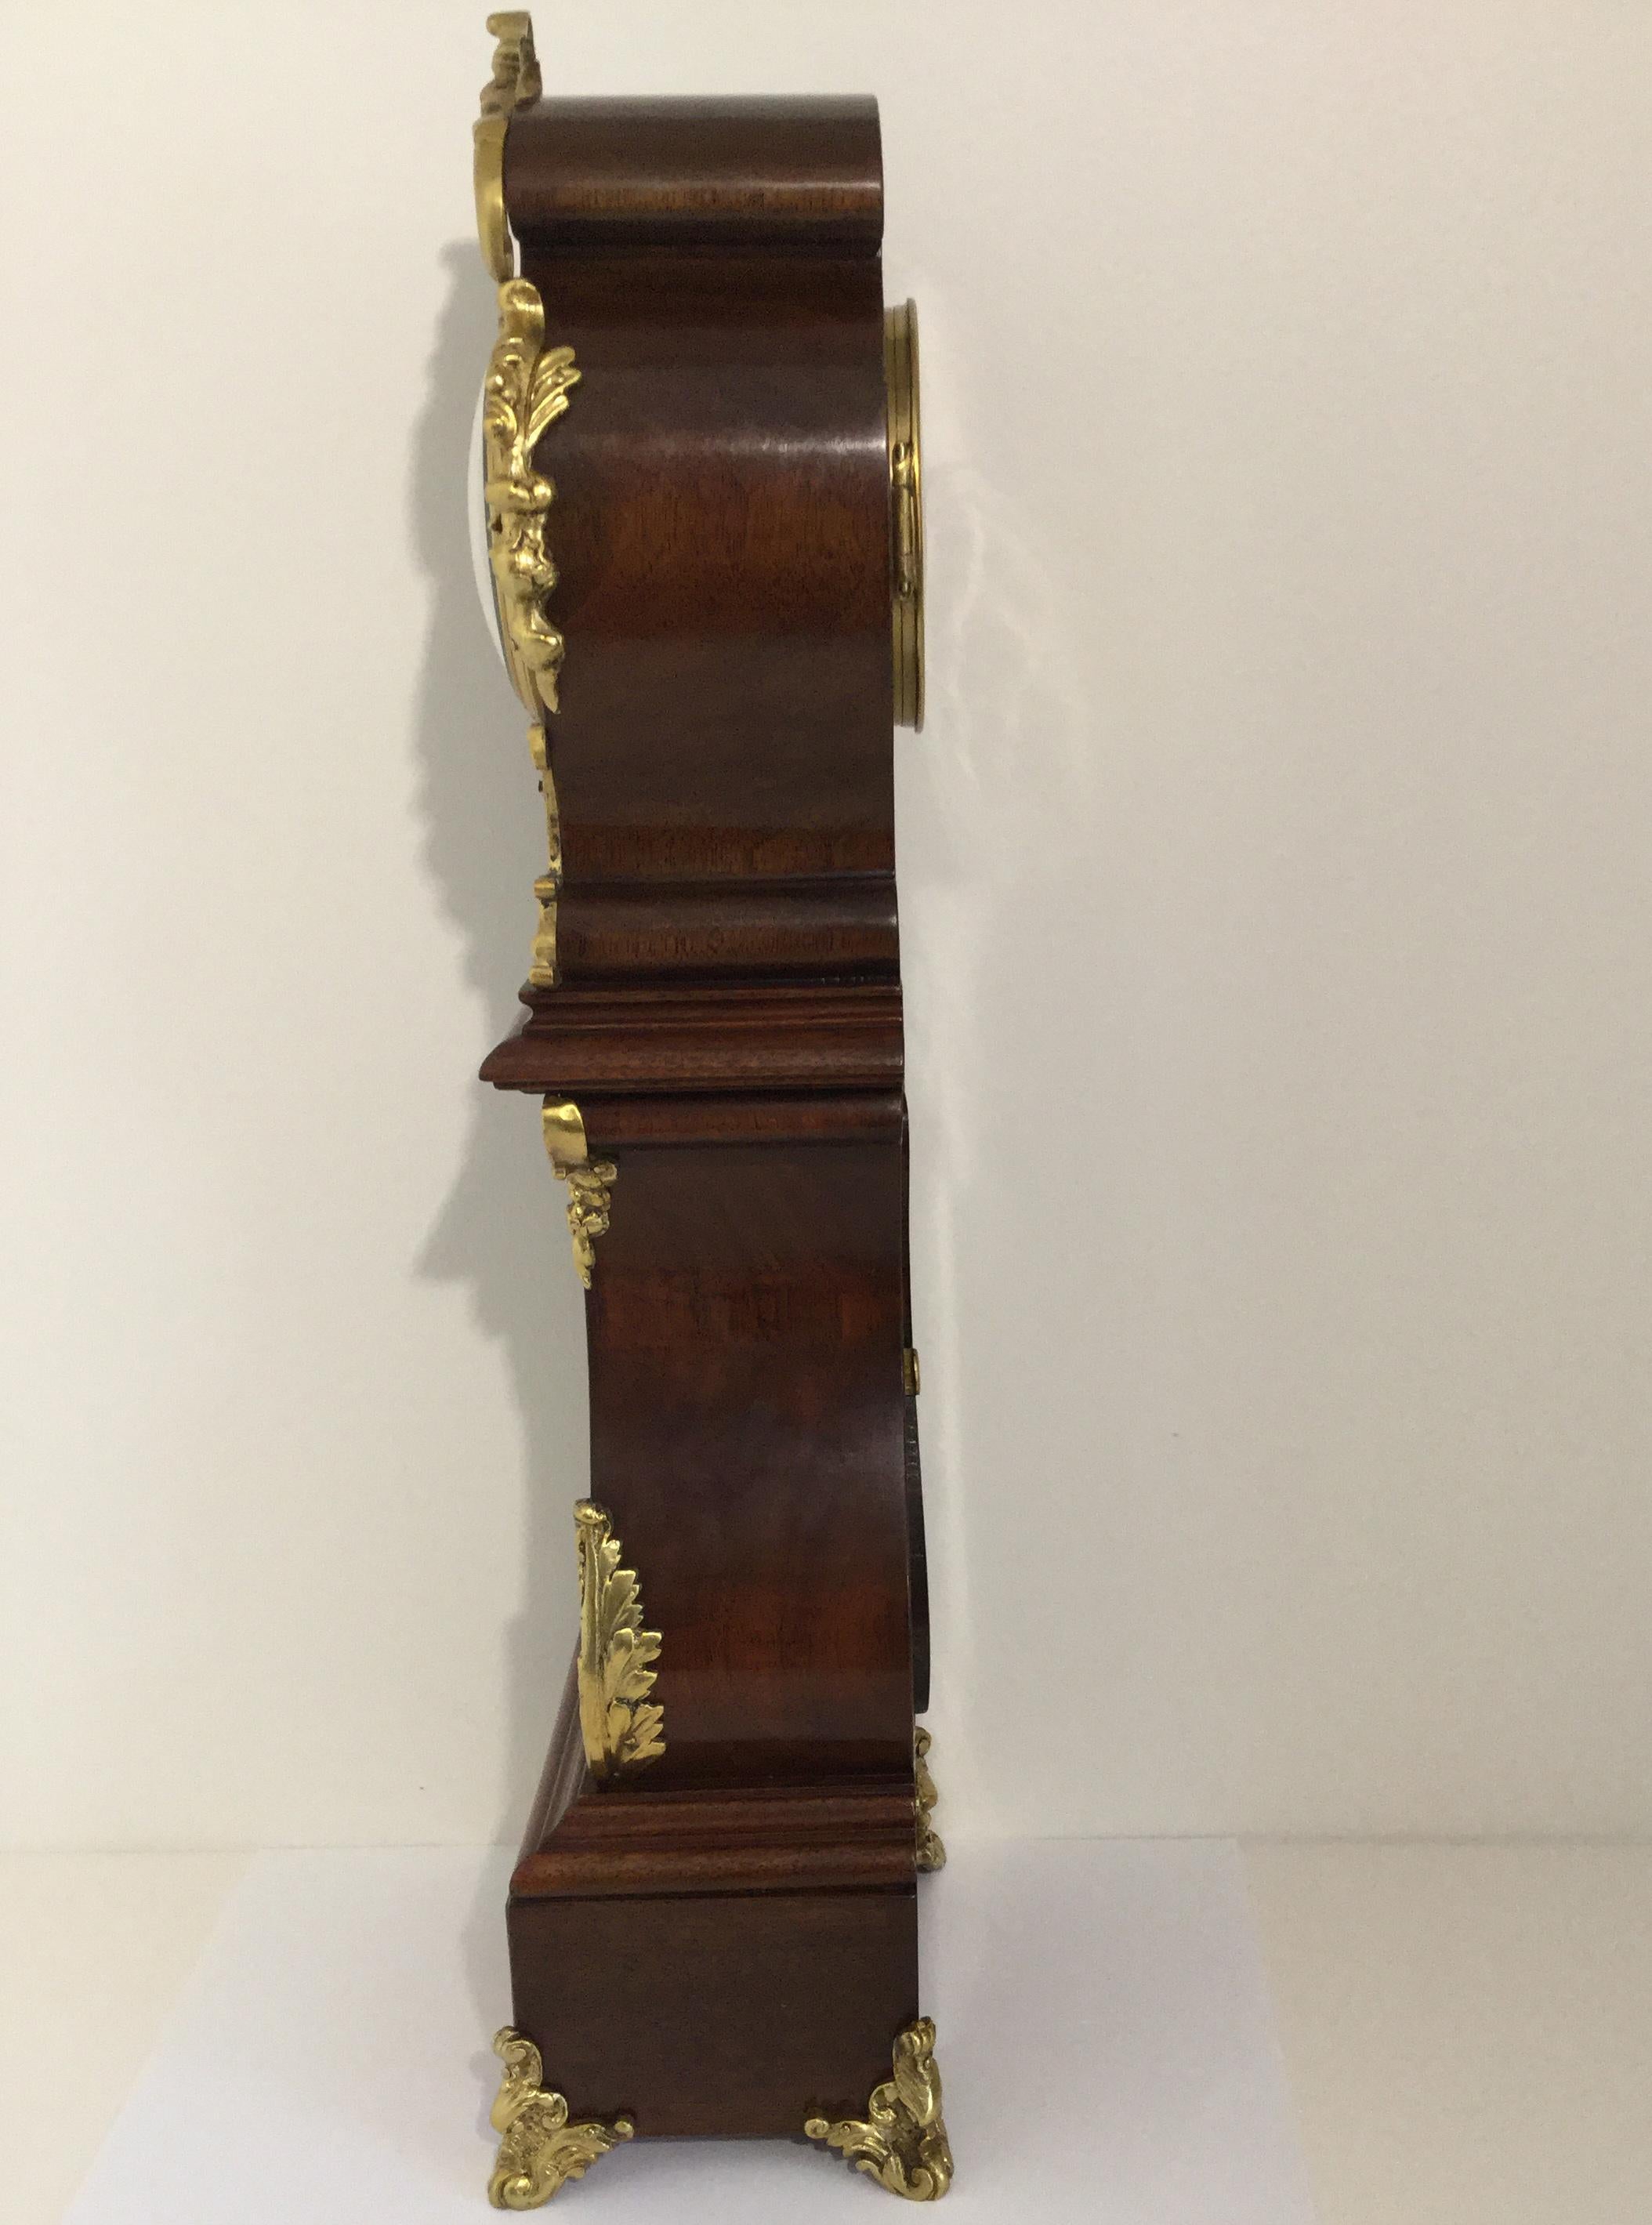 An attractive Rococo style miniature longcase clock, circa 1870. The waisted polished mahogany case adorned with decorative brass mounts. The quality ceramic segmented dial with Roman numerals and minute marks, no chips or cracks, with a plain